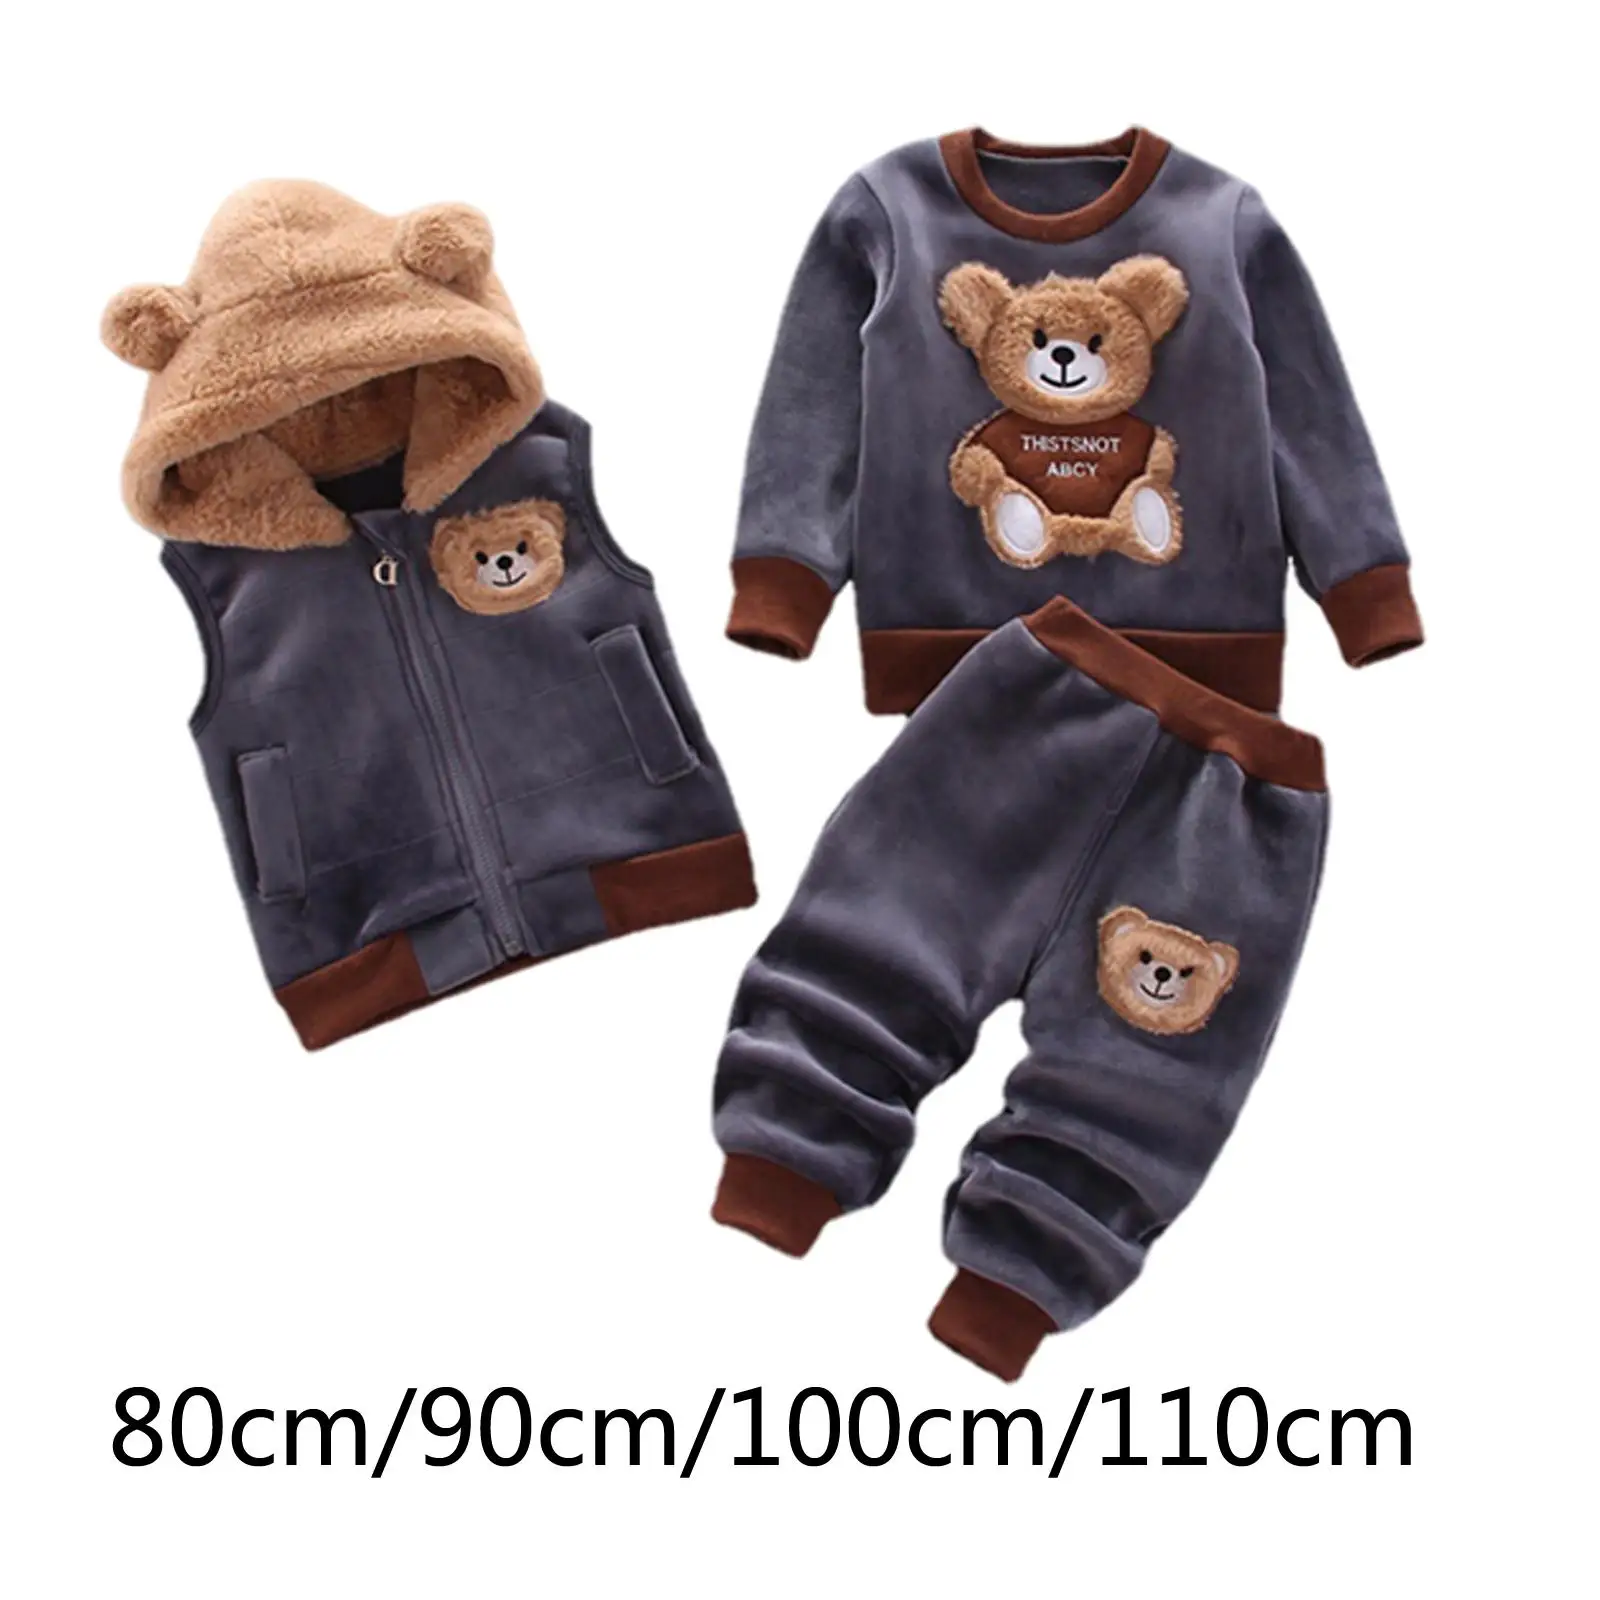 Winter Baby Clothes Soft Warm for New Year Baby 1-3 Years Olds Holiday Gifts